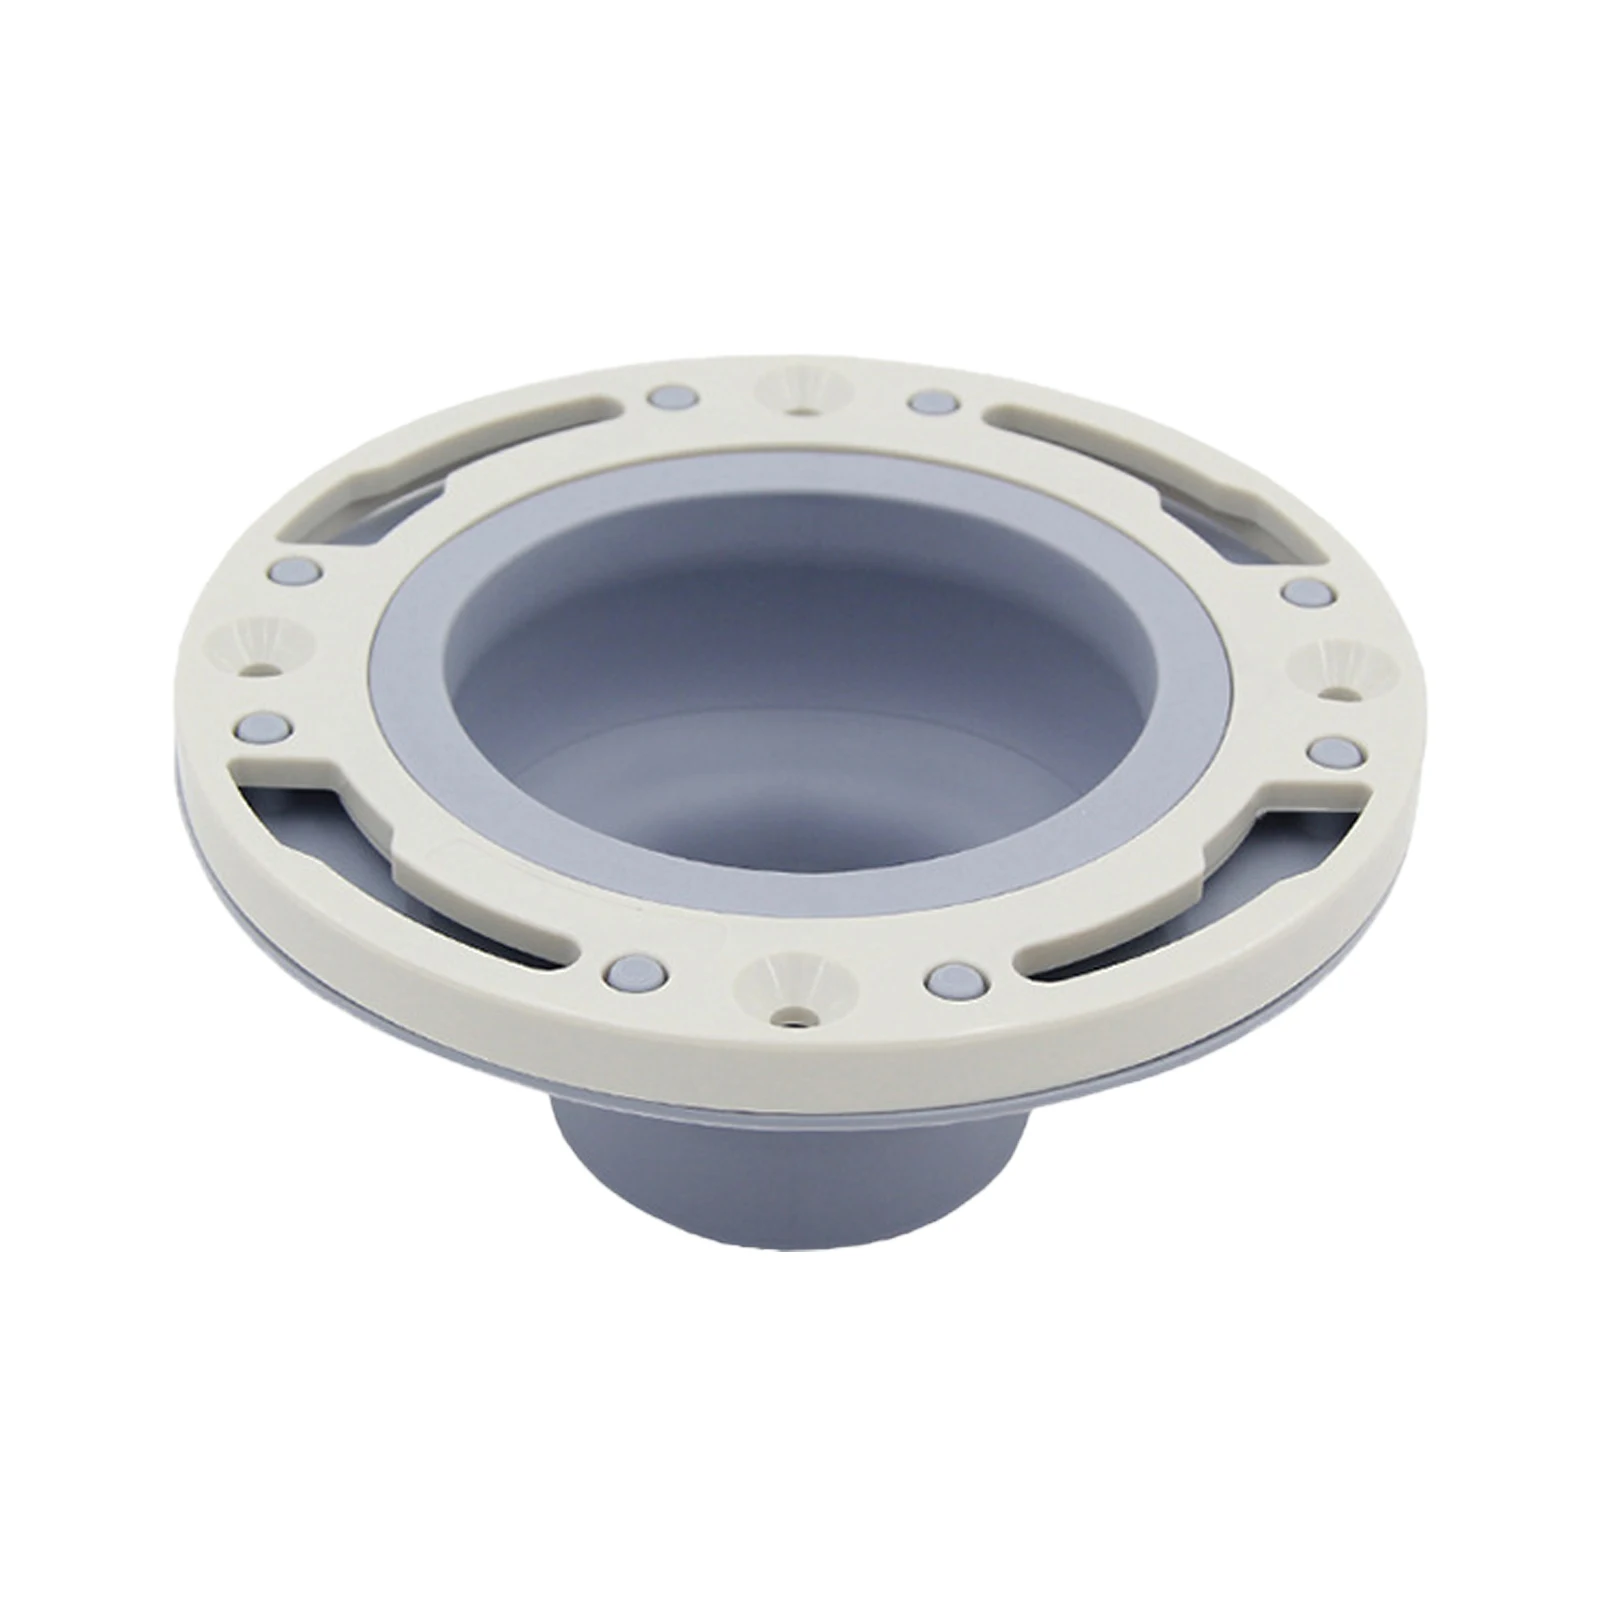 

Drain Lines Repair Replacement Anti Leakage -Free Sealing Ring Fitting Practical Toilet Flange Universal Easy Installation